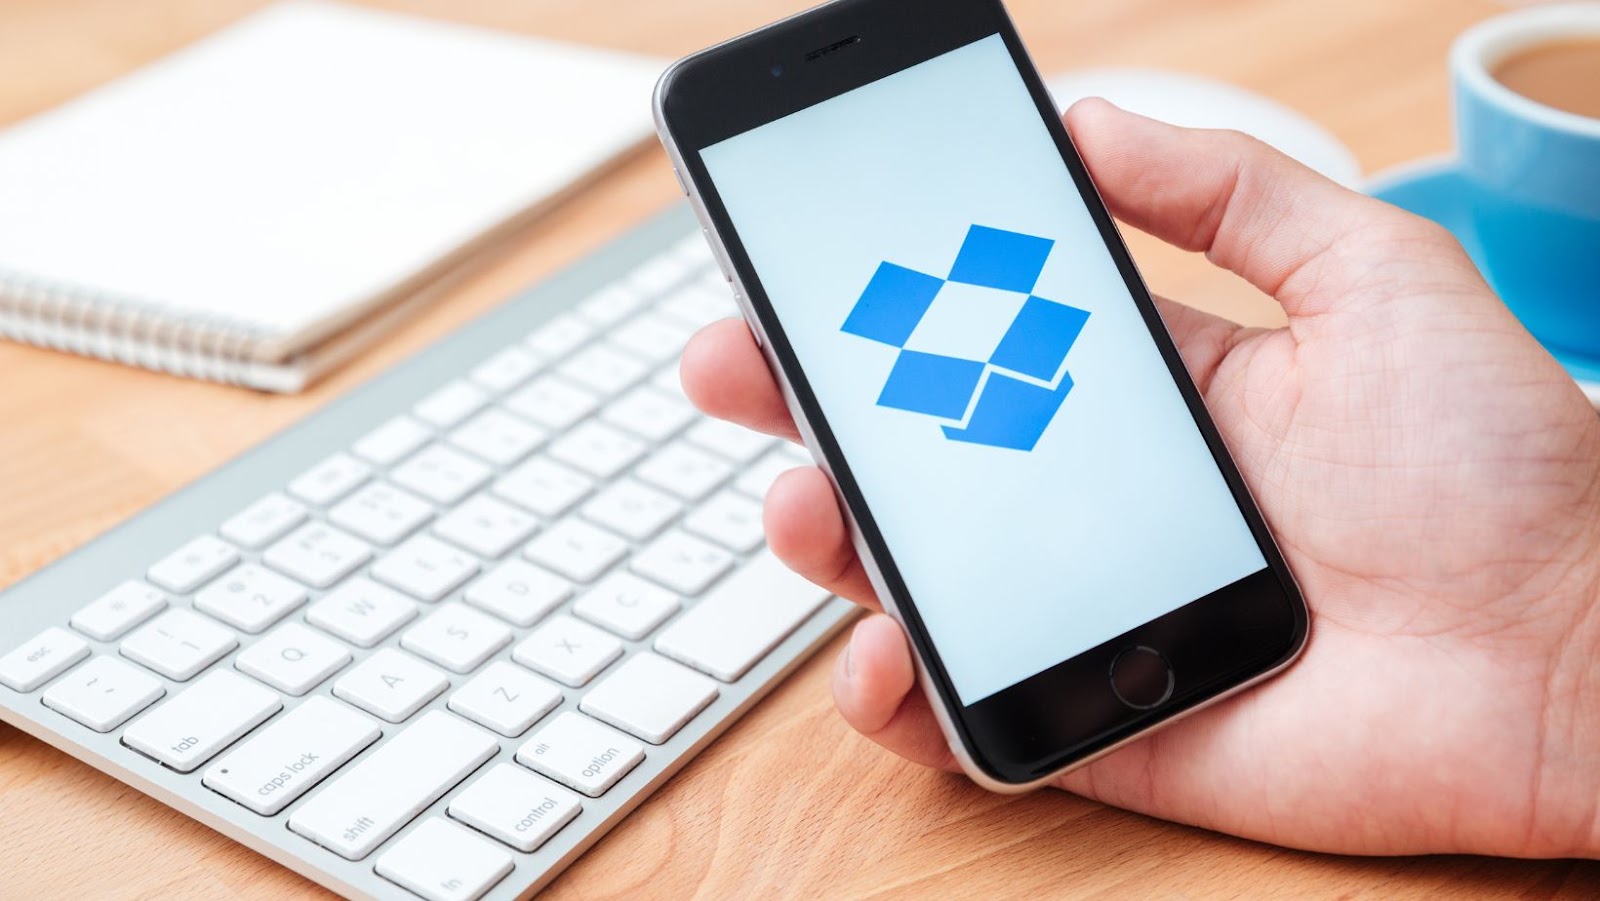 How will Dropbox’s acquisition may impact the way users use Dropbox and DocSend